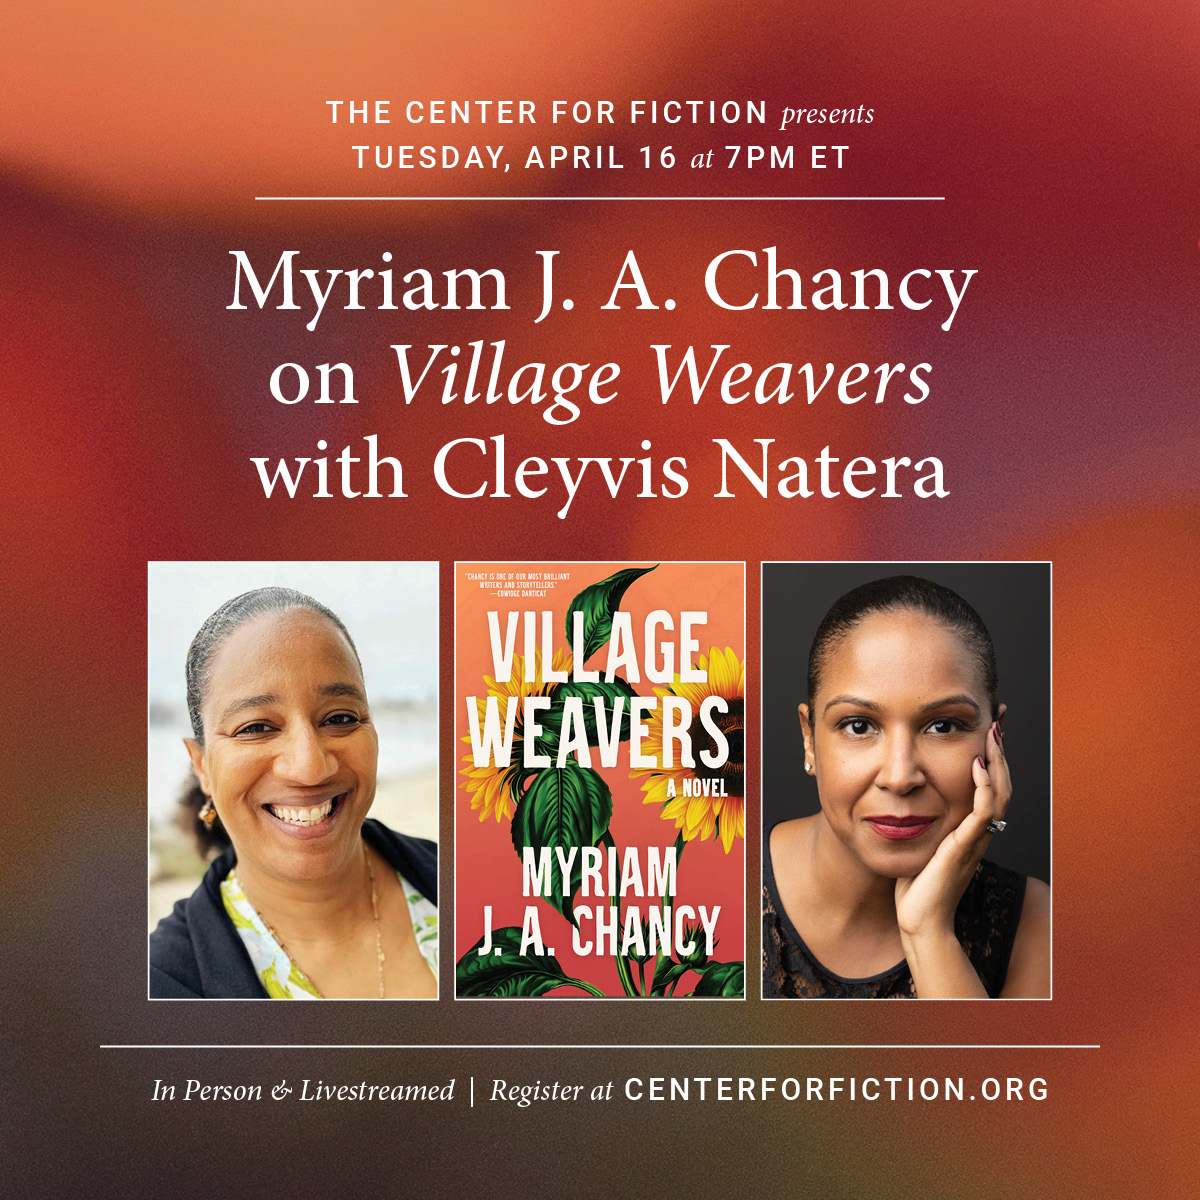 Myriam J.A. Chancy will be joining us with Cleyvis Natera on 4/16 in celebration of her latest novel, Village Weavers! The novel follows two girls who become friends in 1940s Port-au-Prince before tensions between their families tear them apart. tinyurl.com/ybzprarm